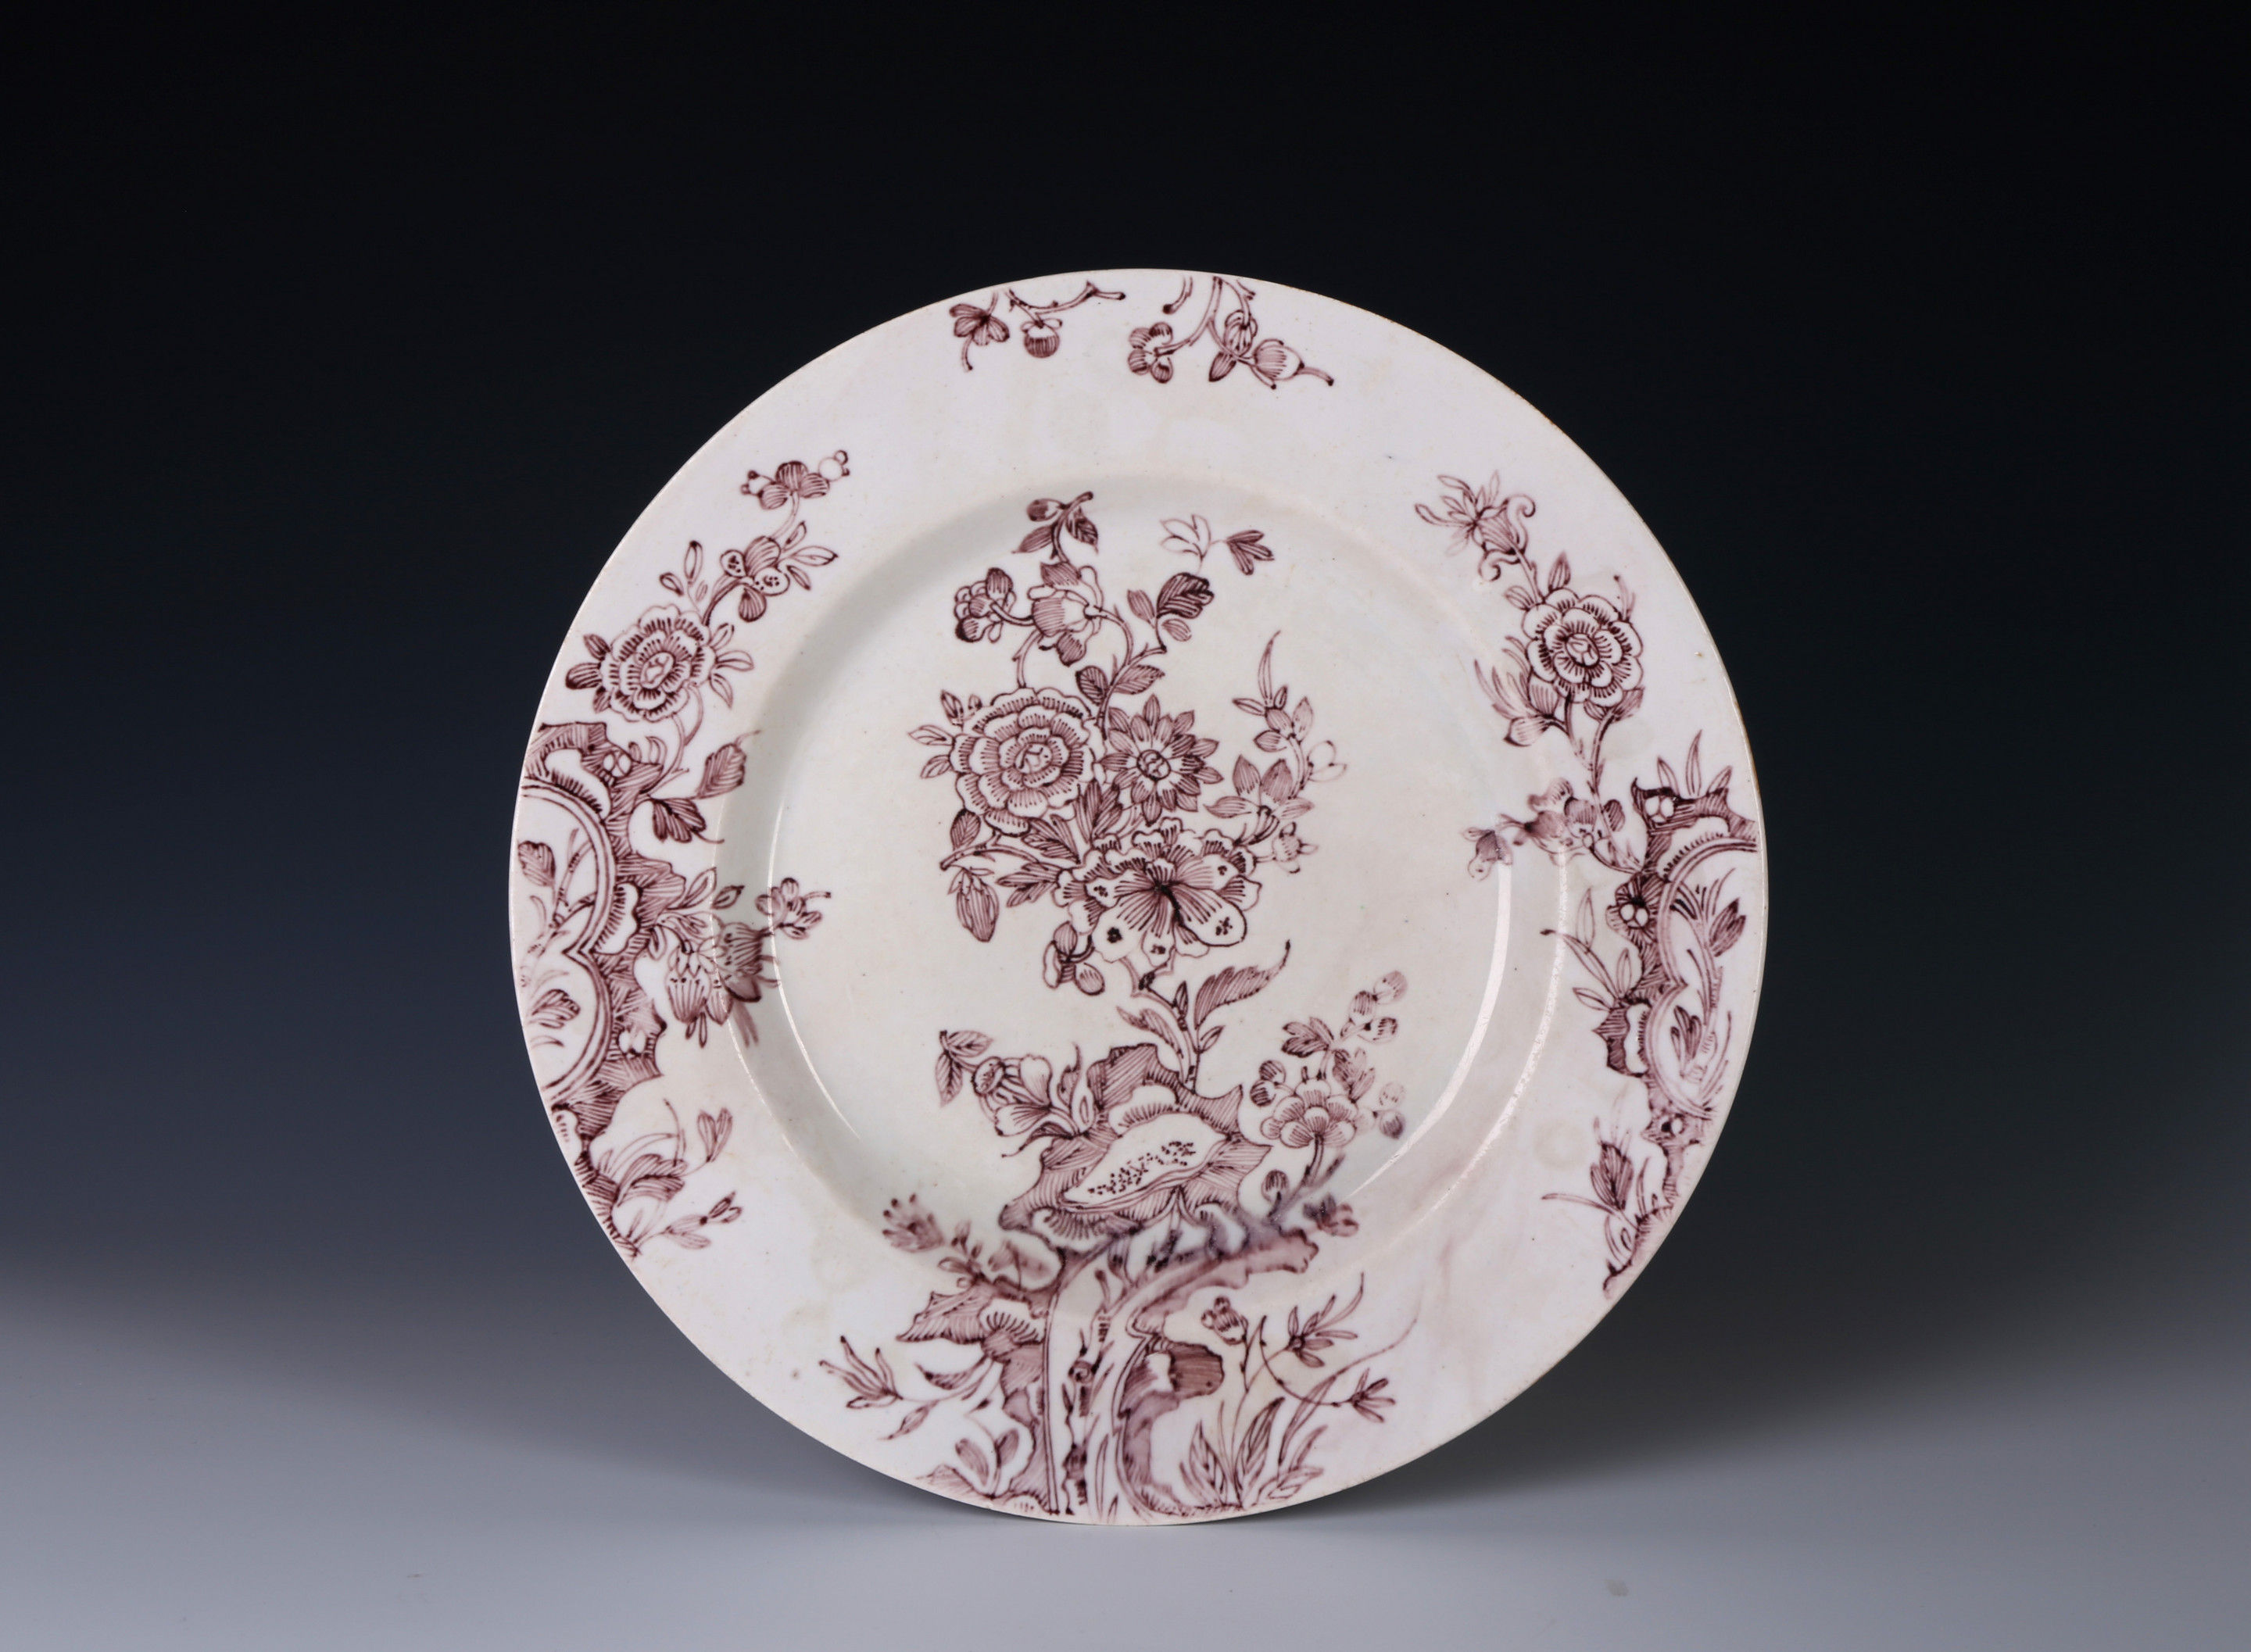 An Experimental English Porcelain dish decorated in Manganese